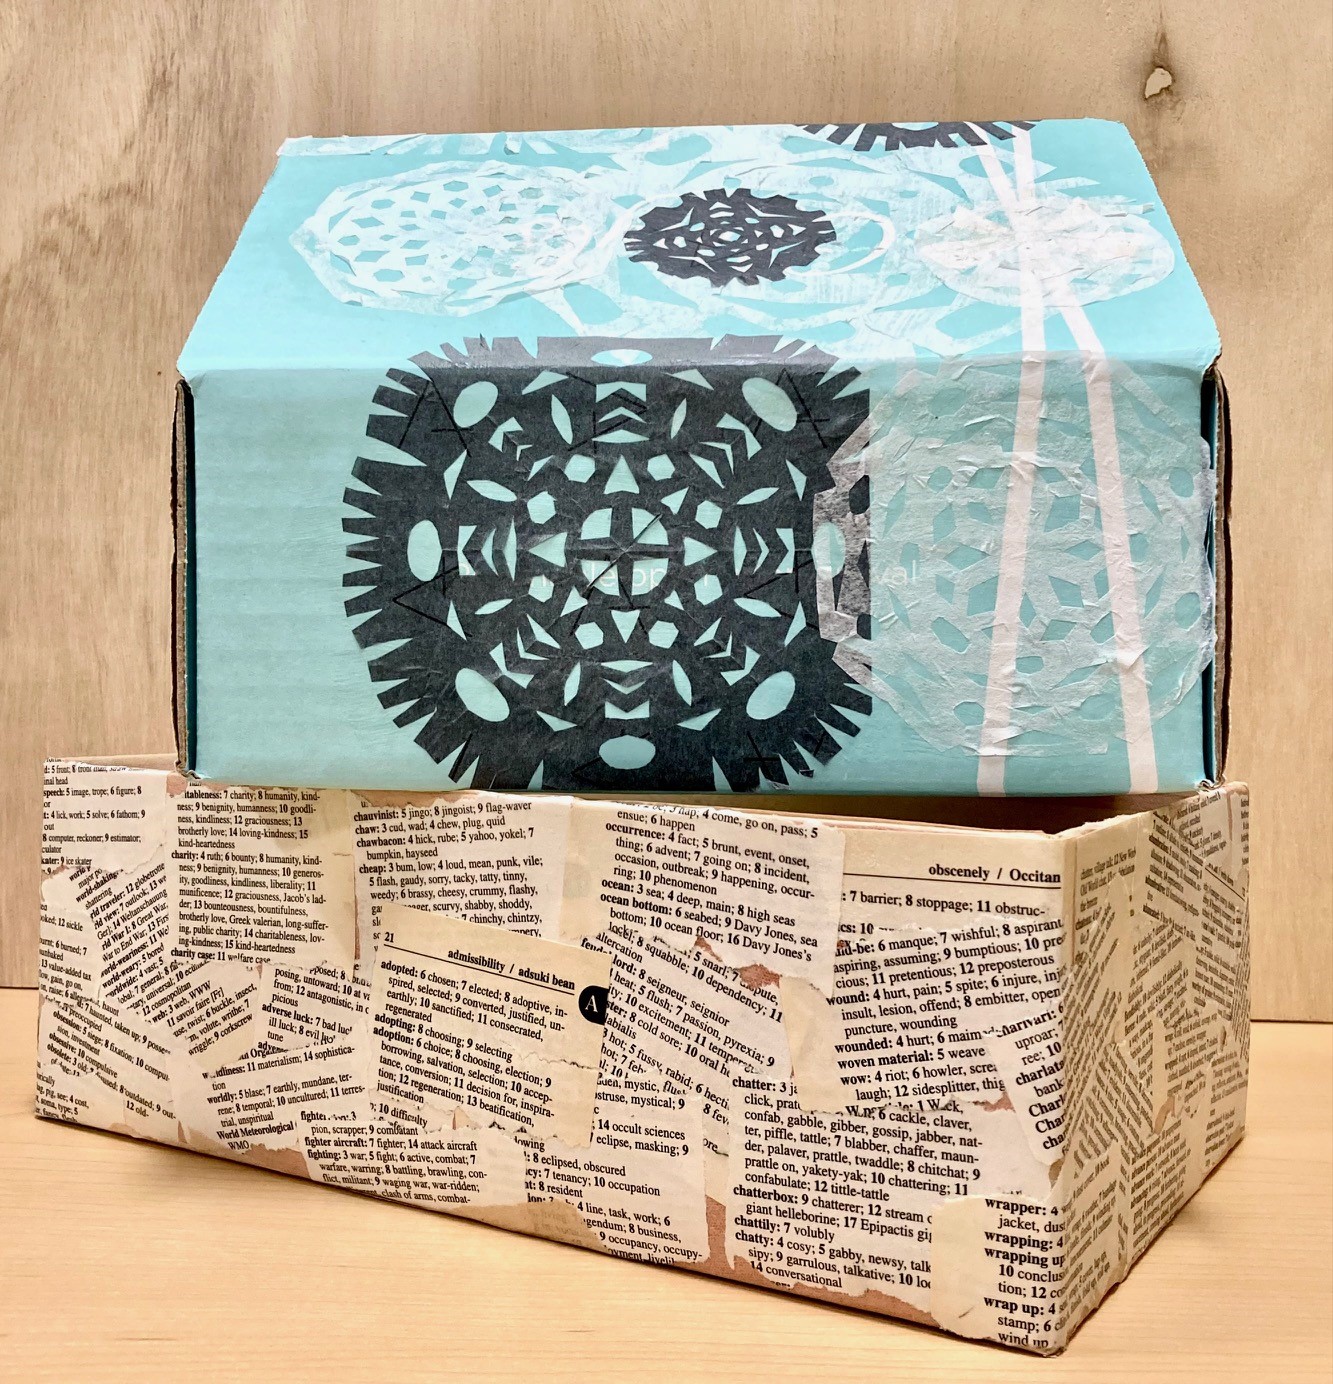 a stack of two cardboard shoeboxes decorated with paper cutouts